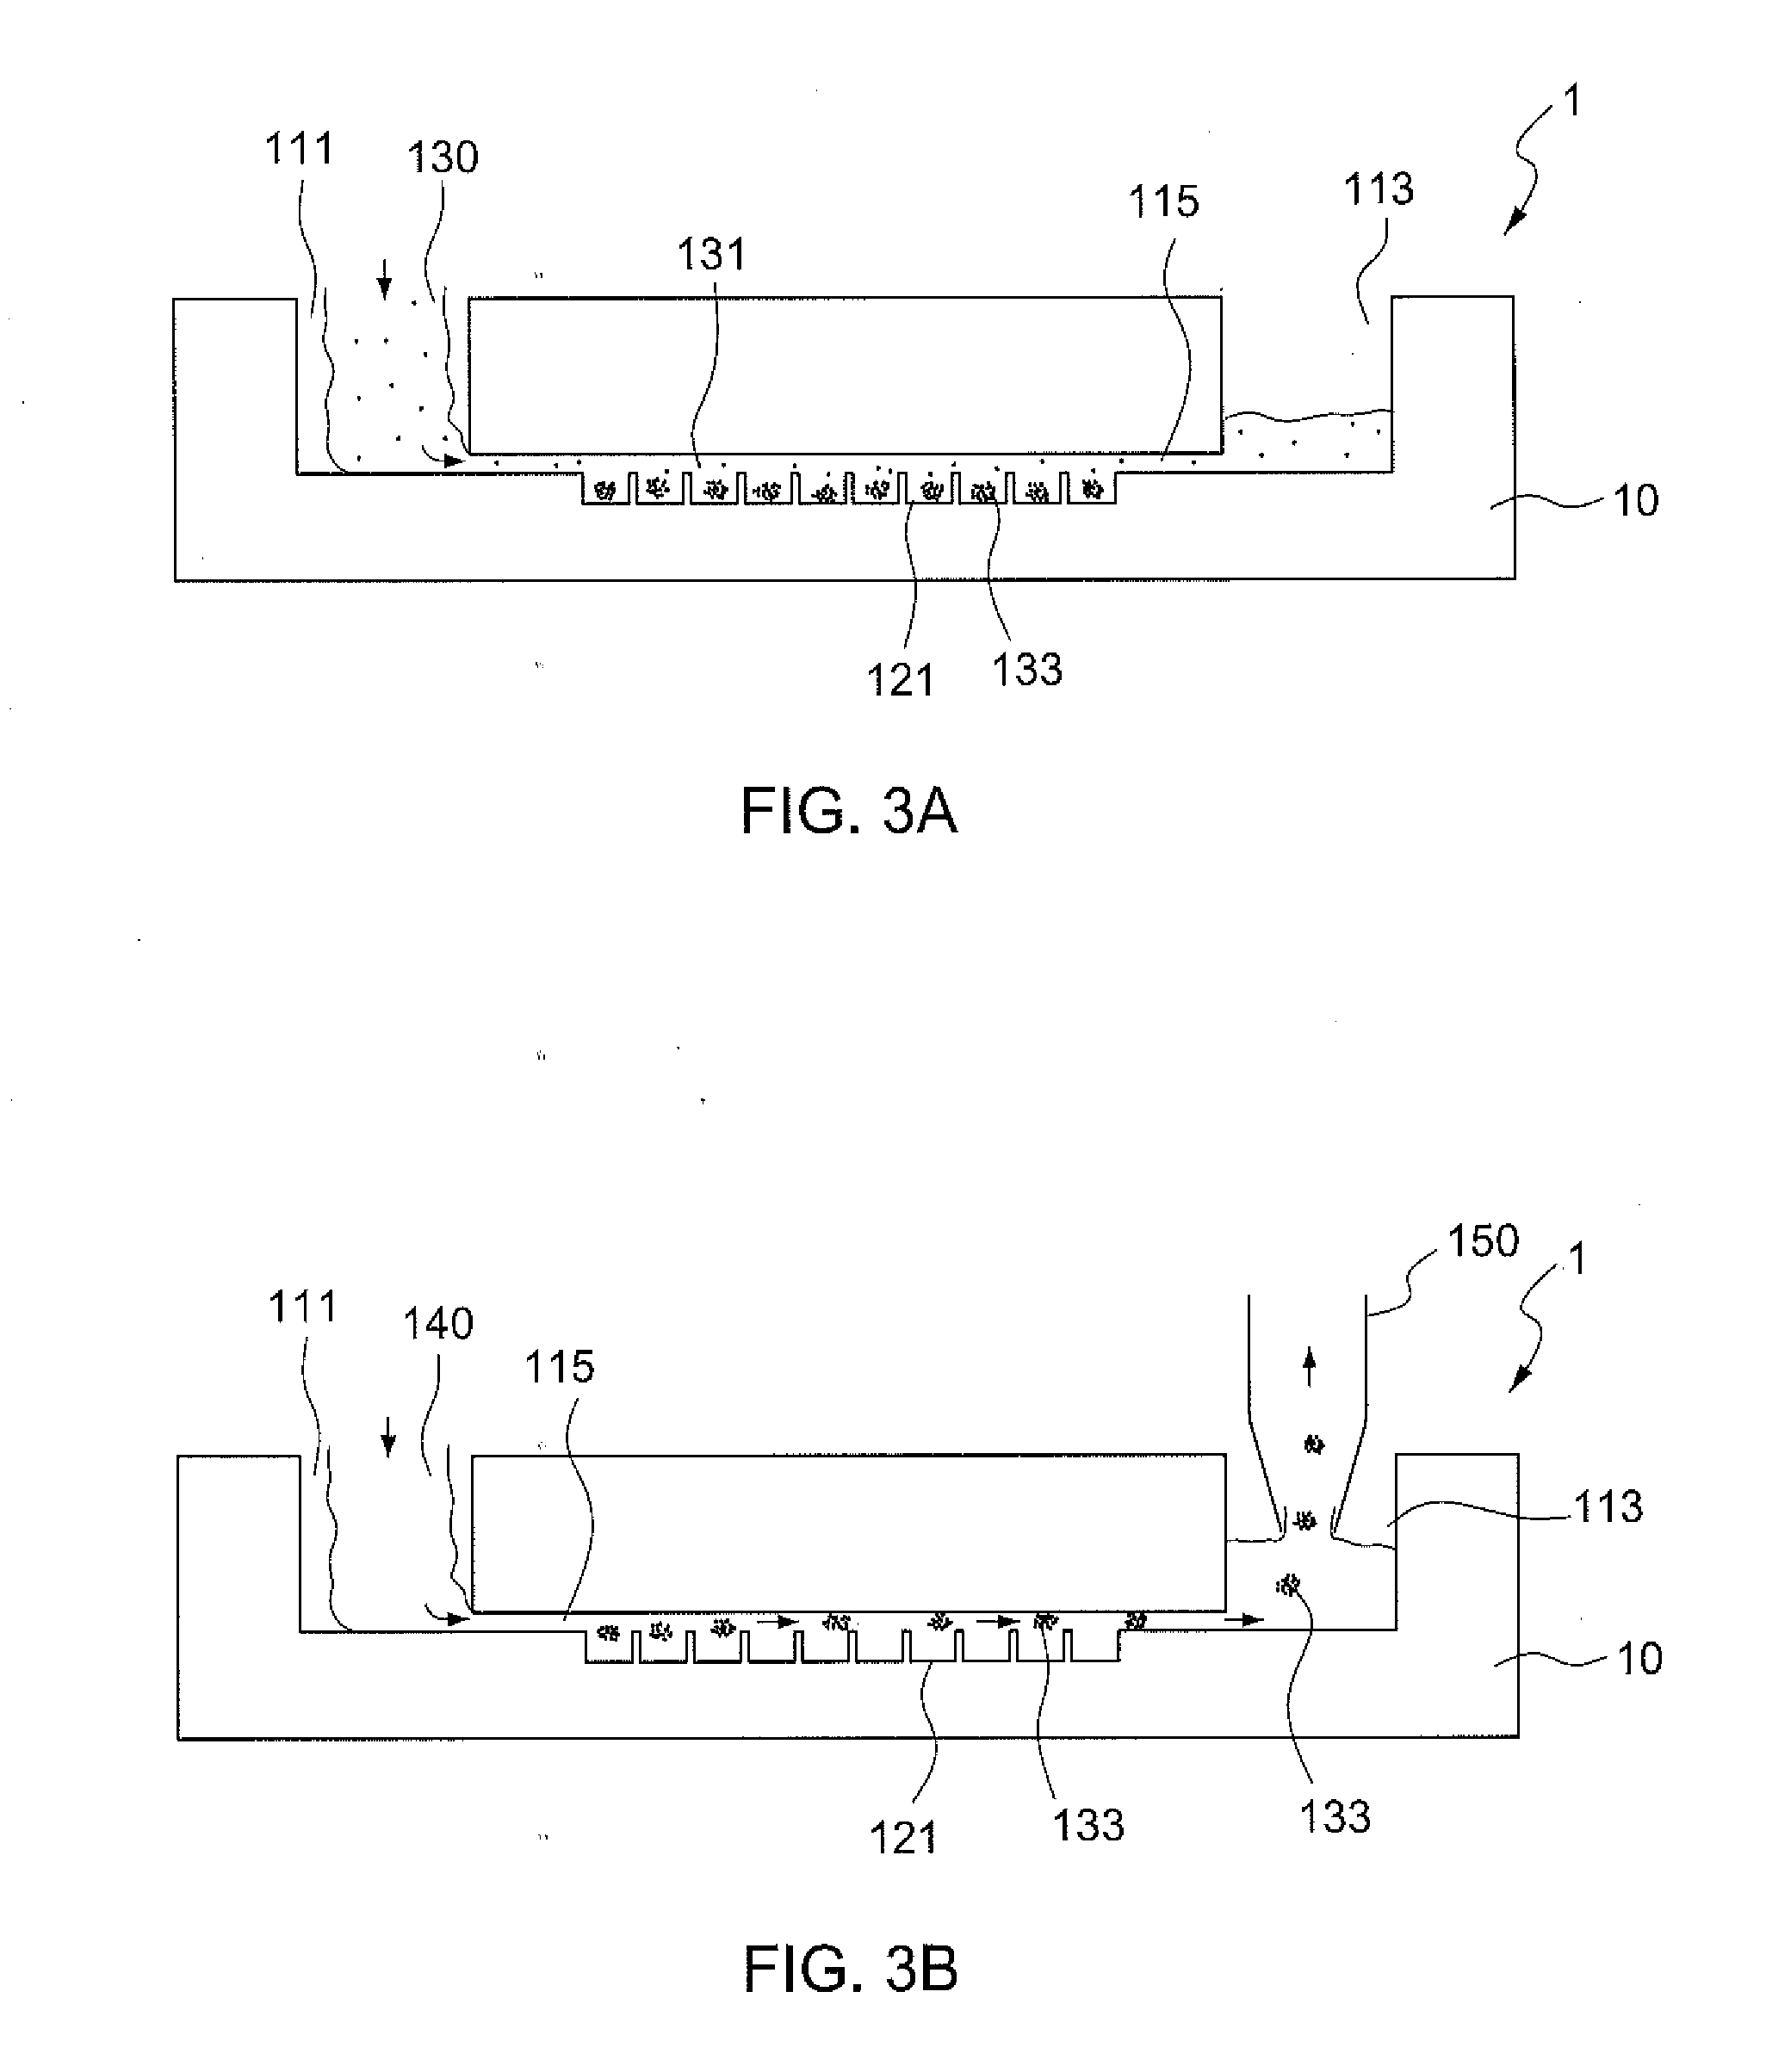 Microfluidic device for cell spheroid culture and analysis